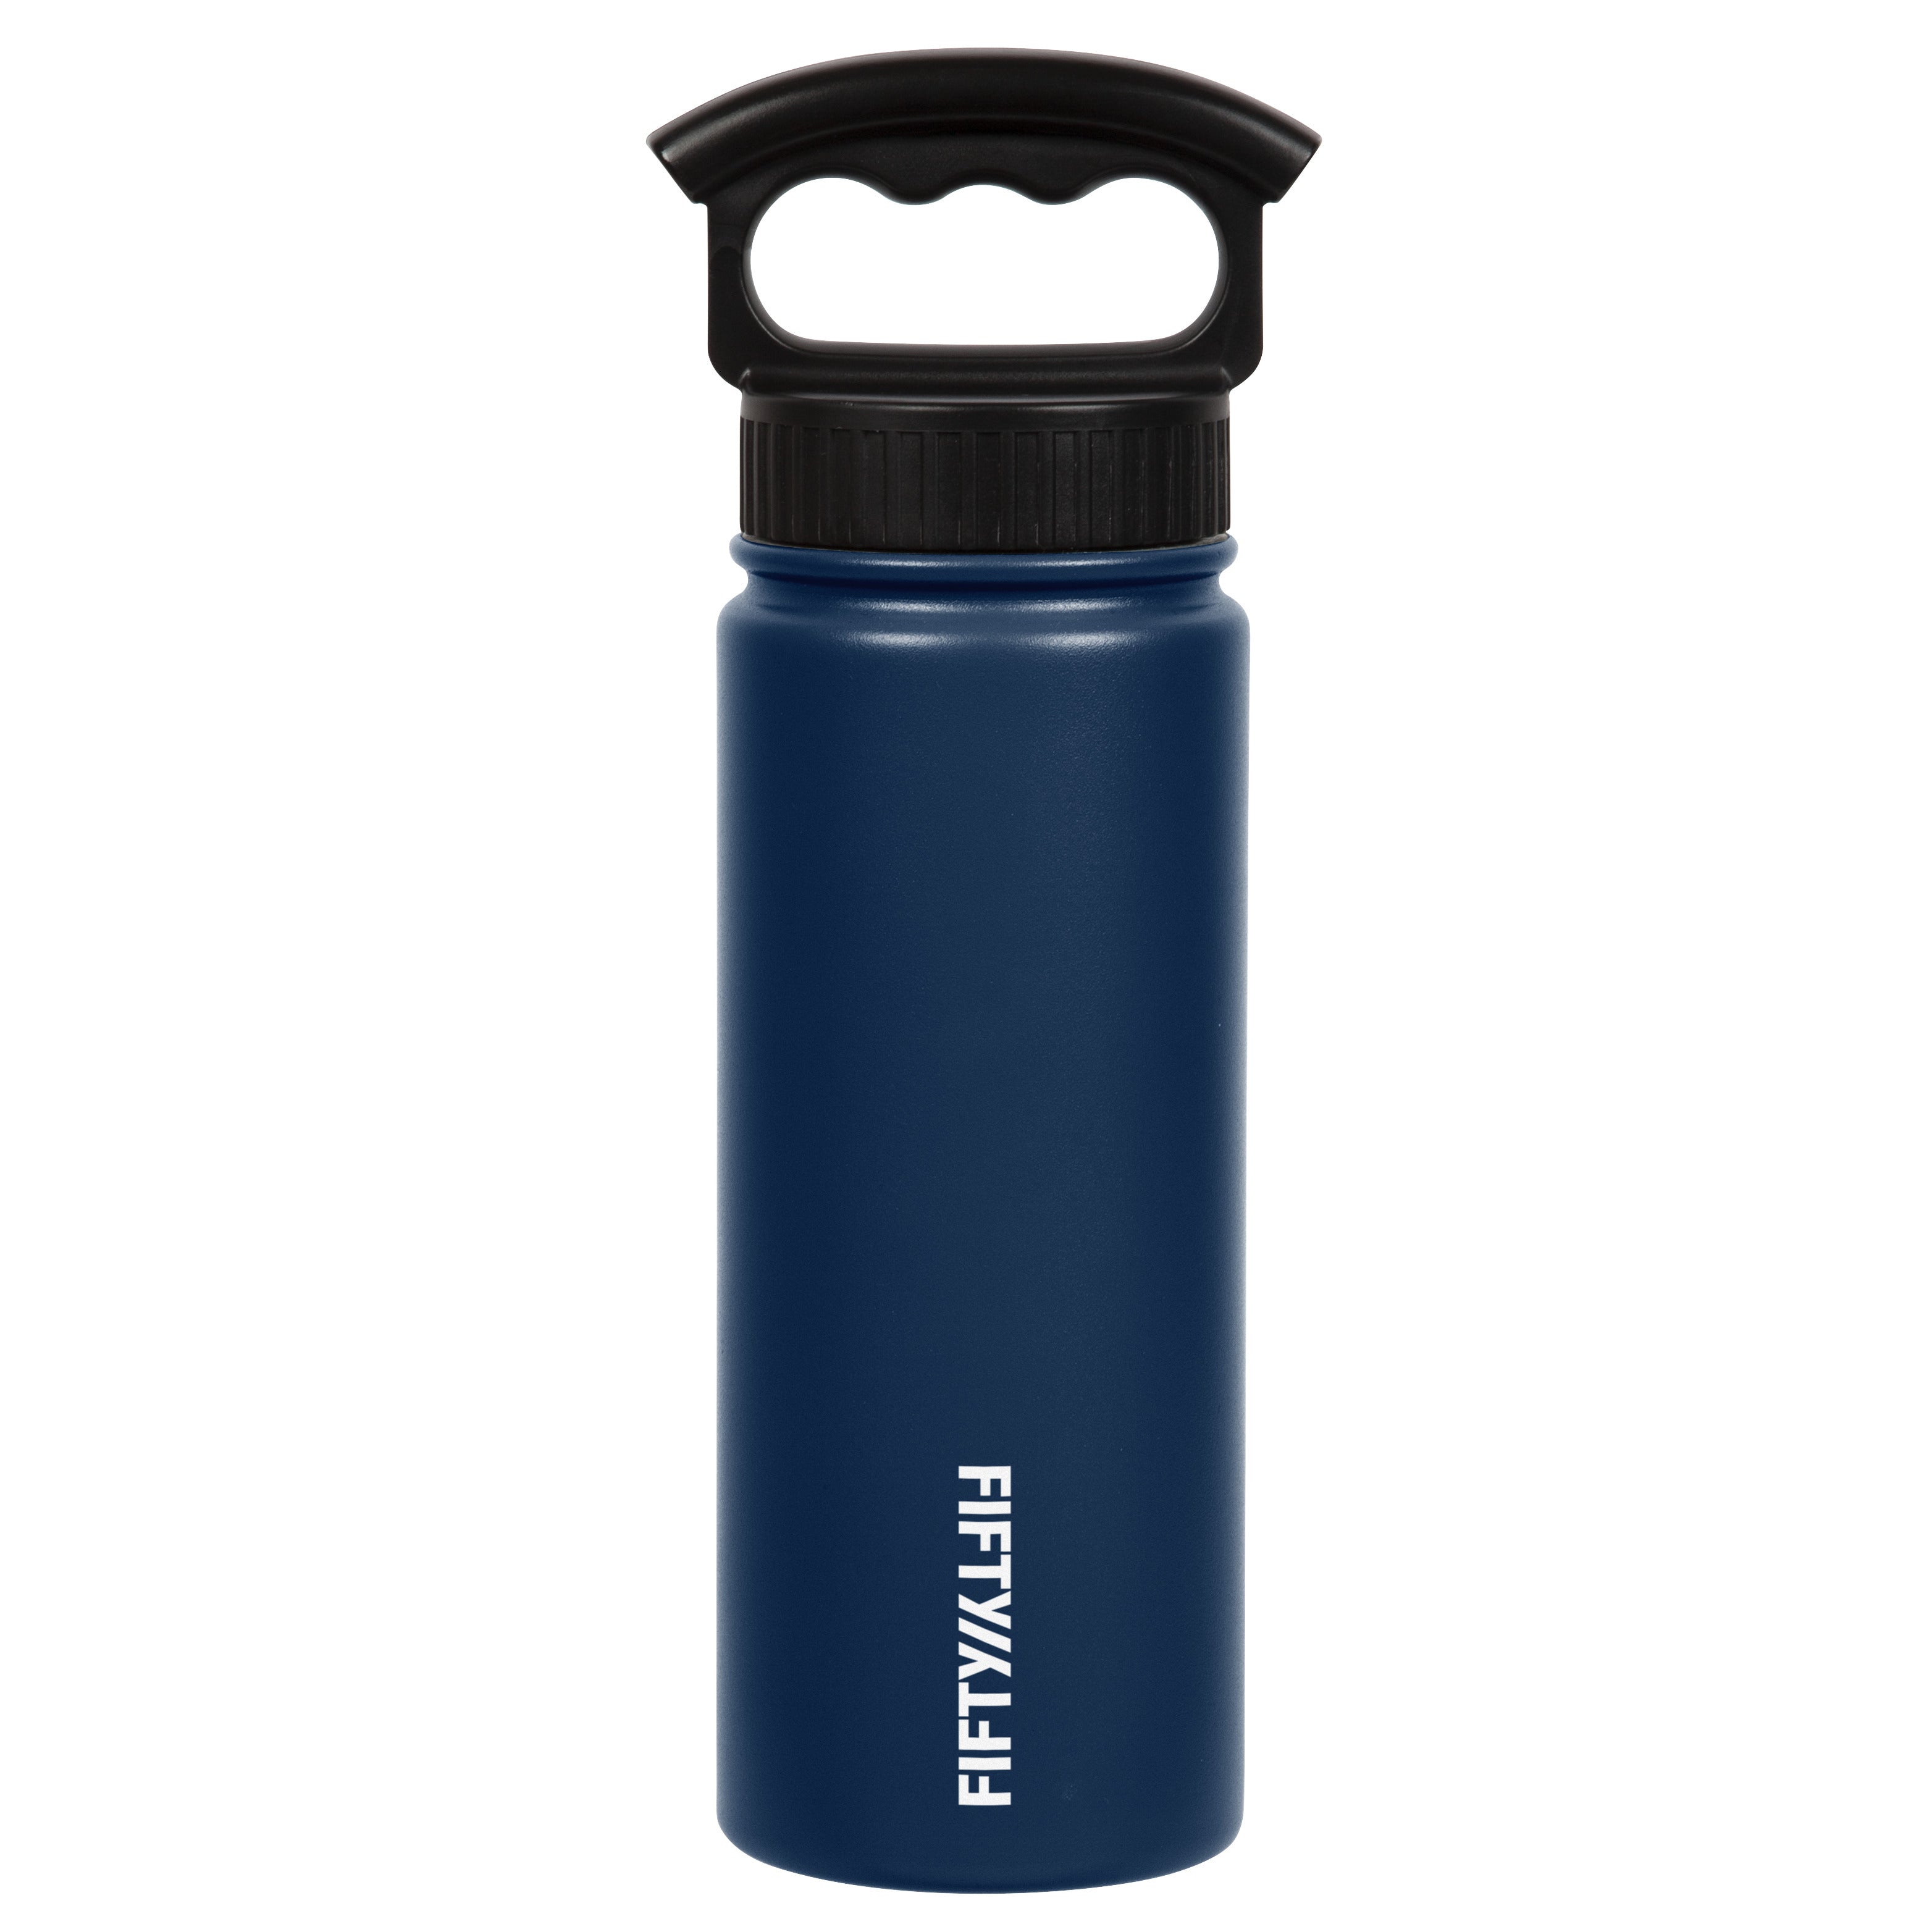 Thermos 18 oz. Stainless Steel Hydration Insulated Vacuum Bottle